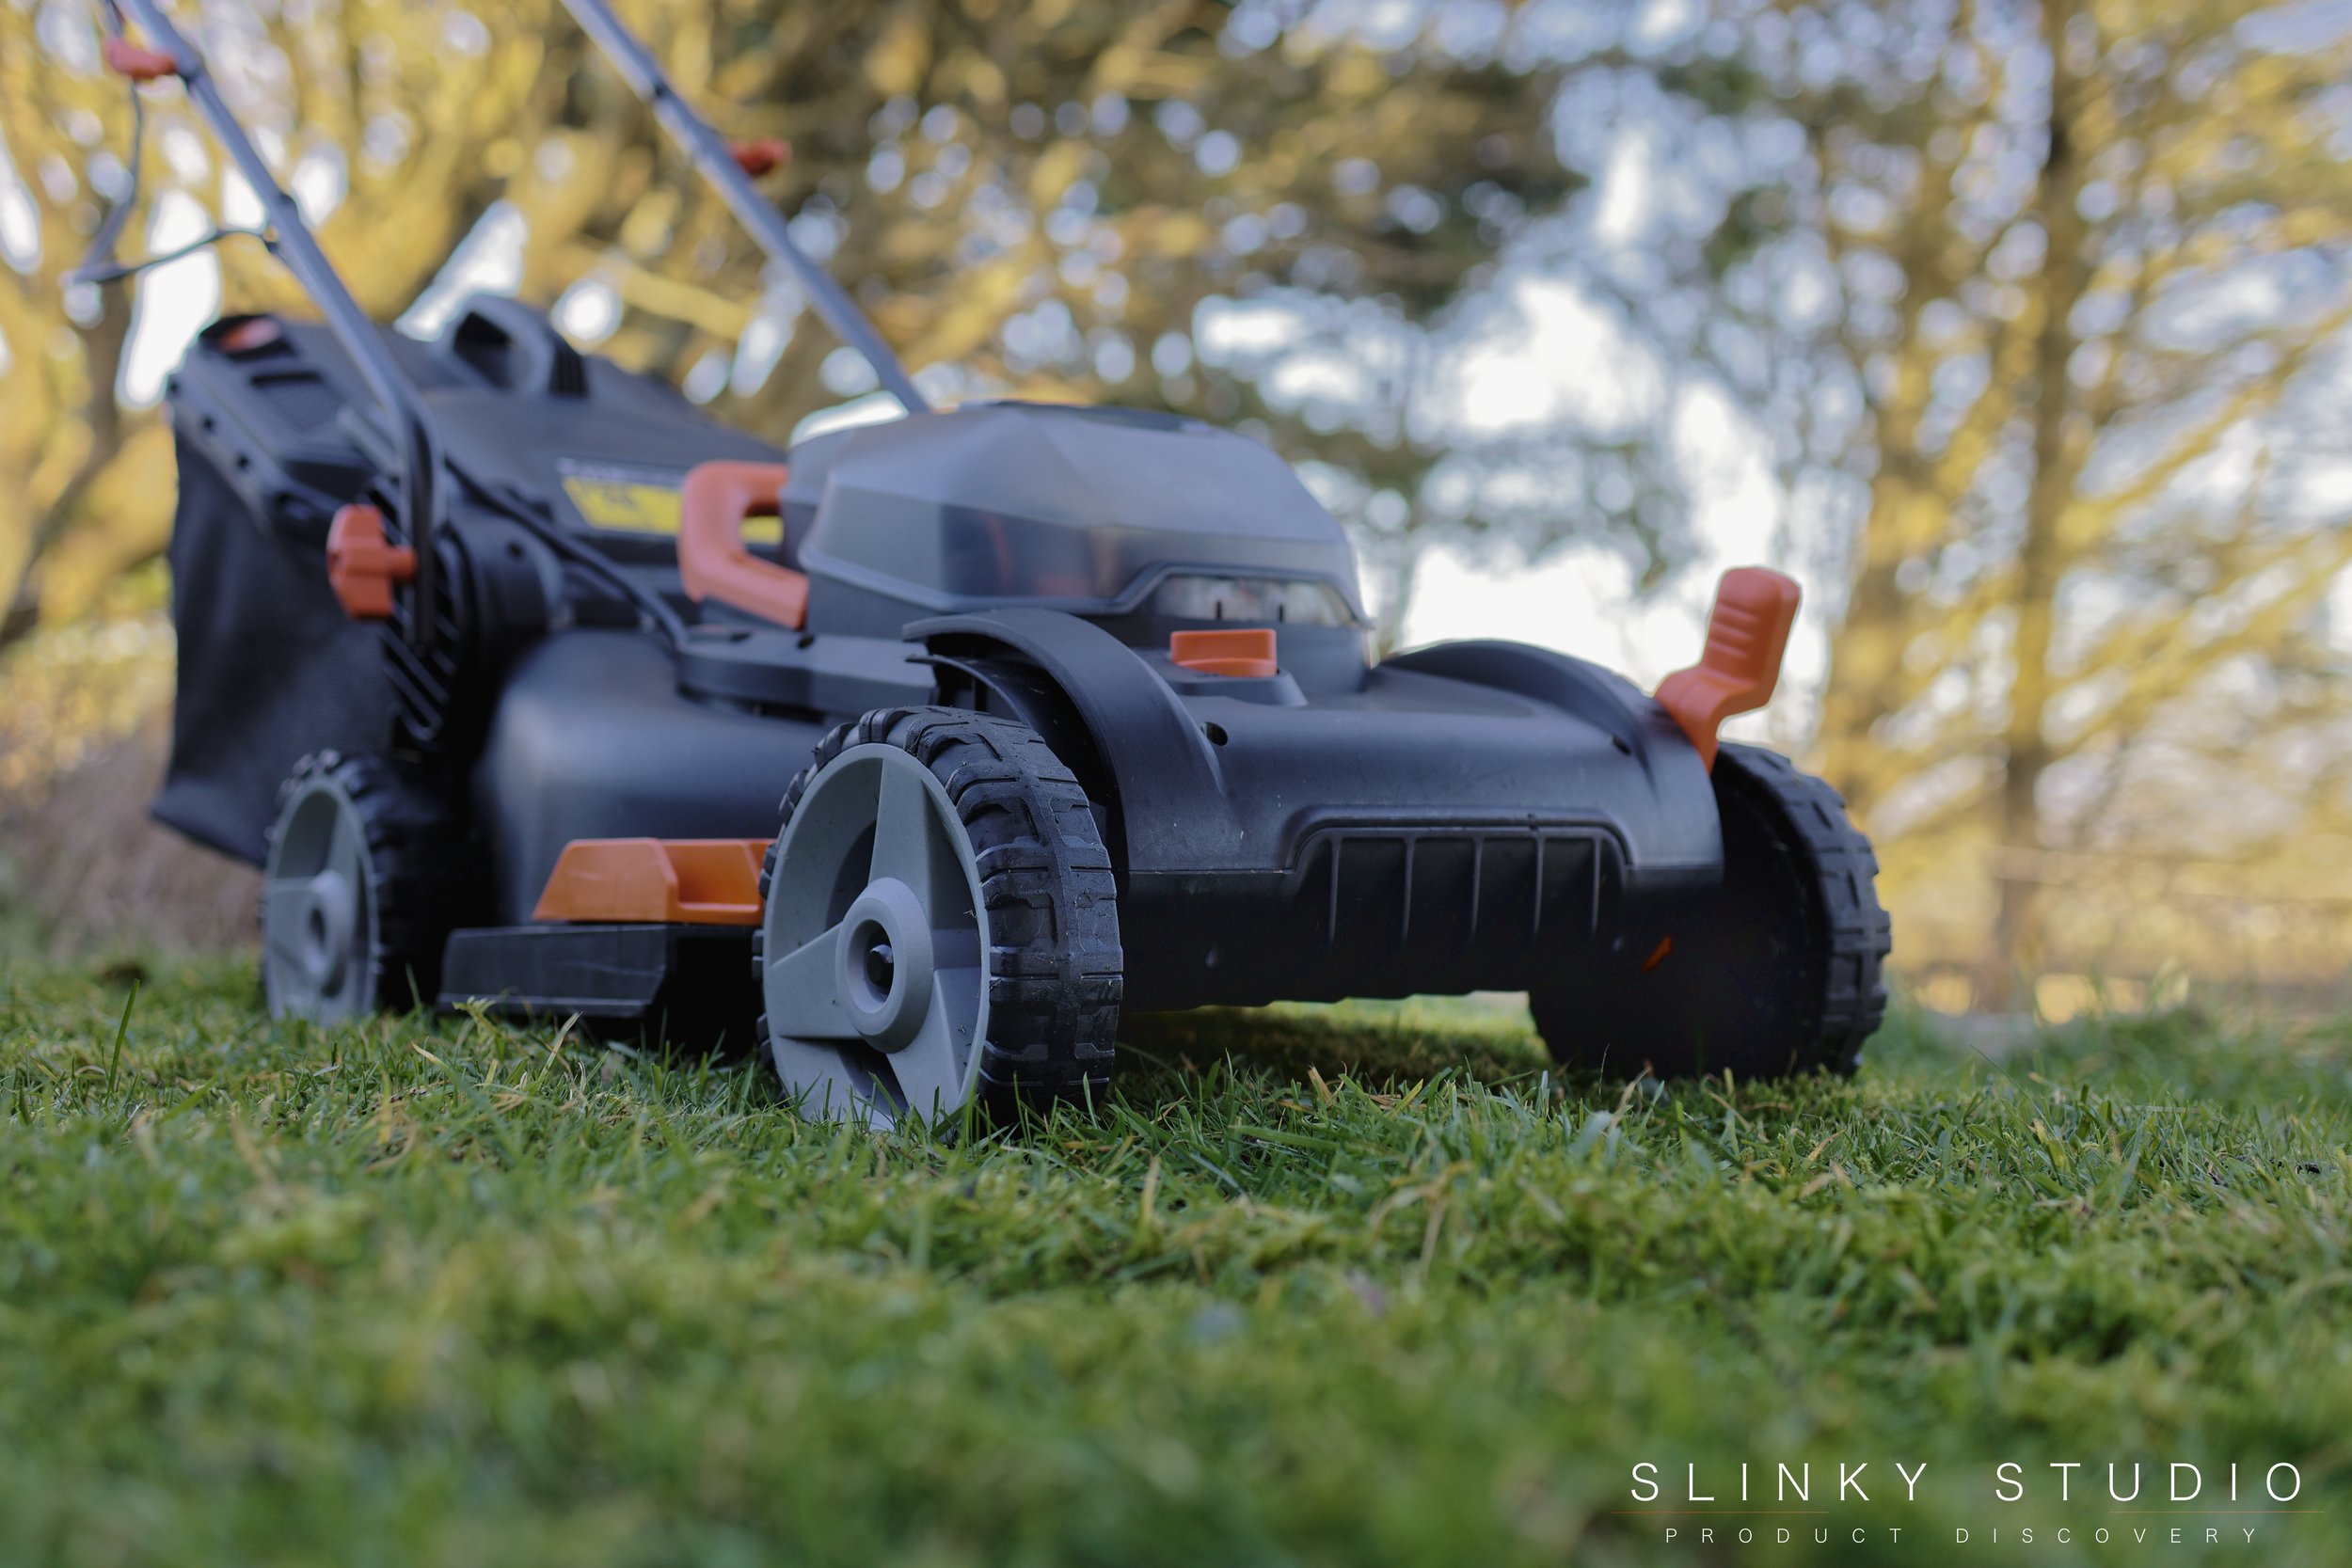 Worx WG743E.1 40V Cordless Lawnmower front view close up.jpg